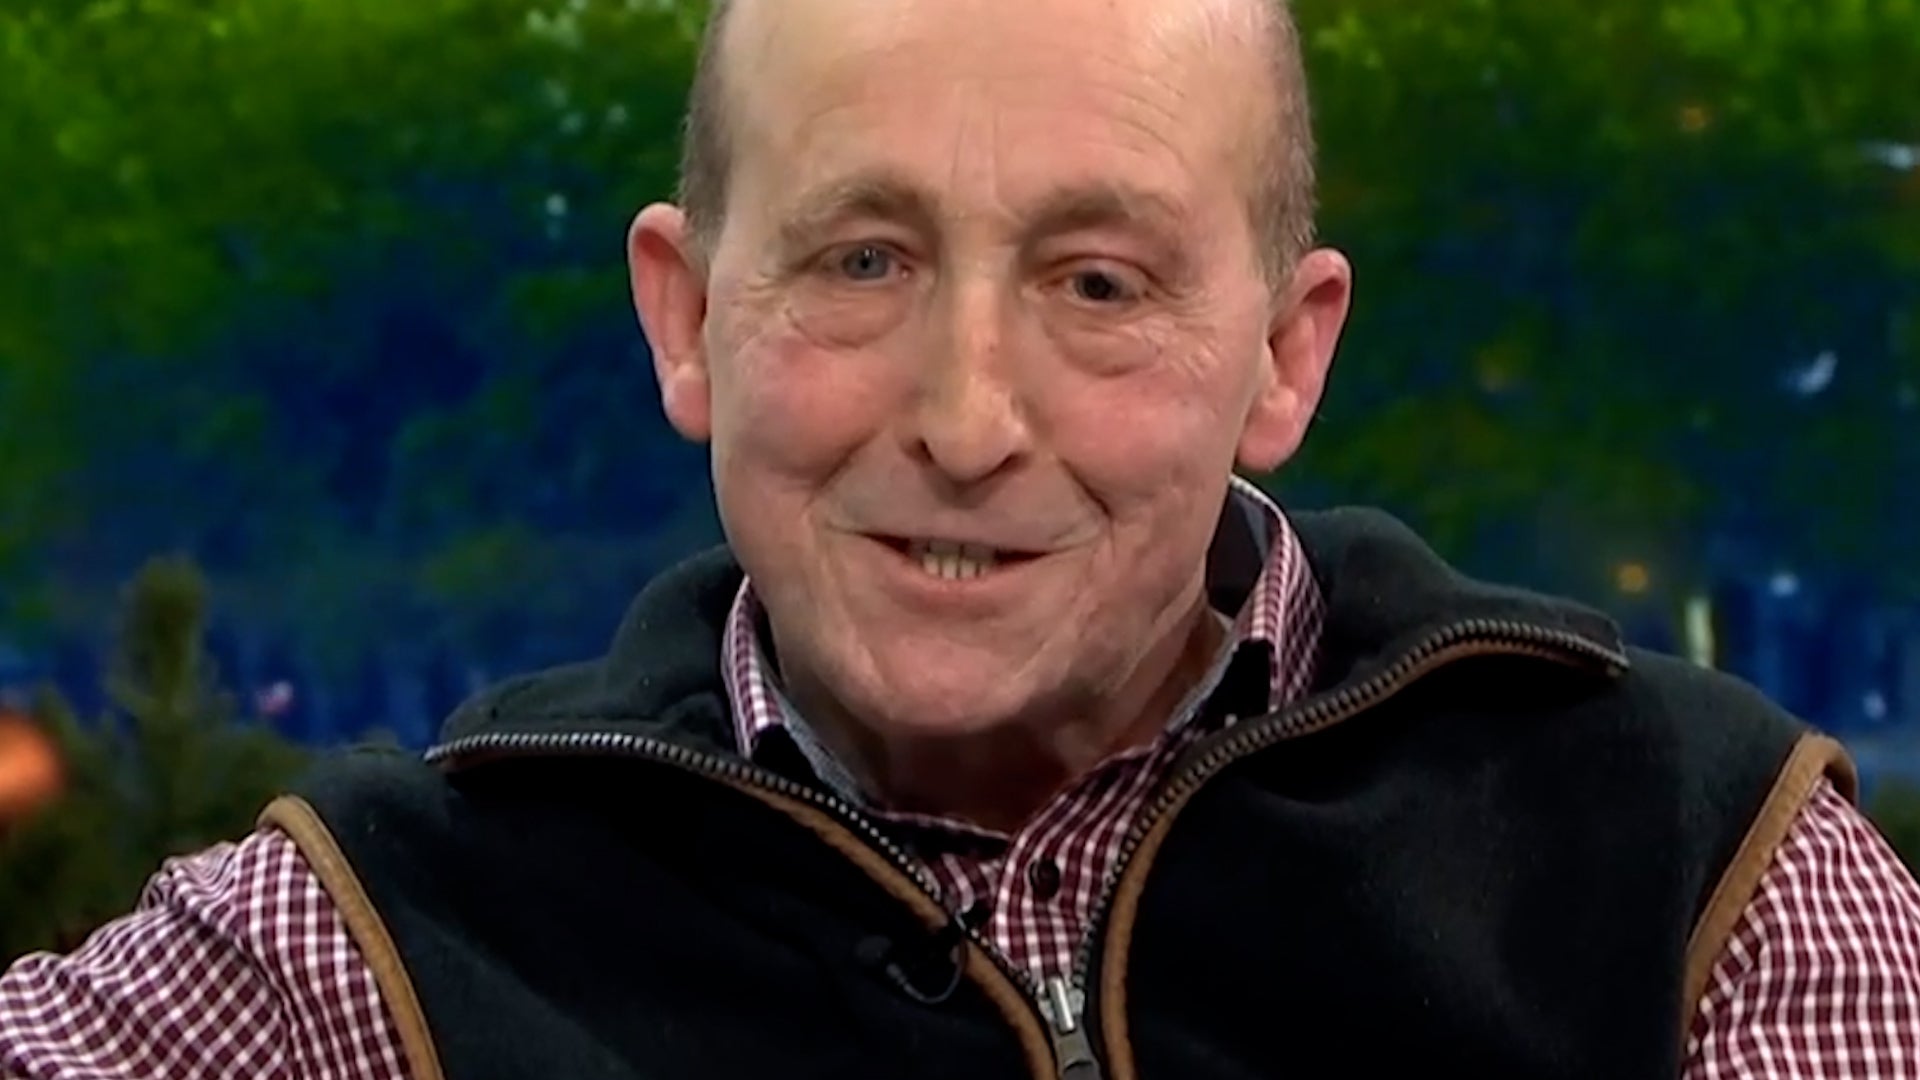 Glen Edwards, 65, saved his colleague from a blaze at the top of a £750 million tower block